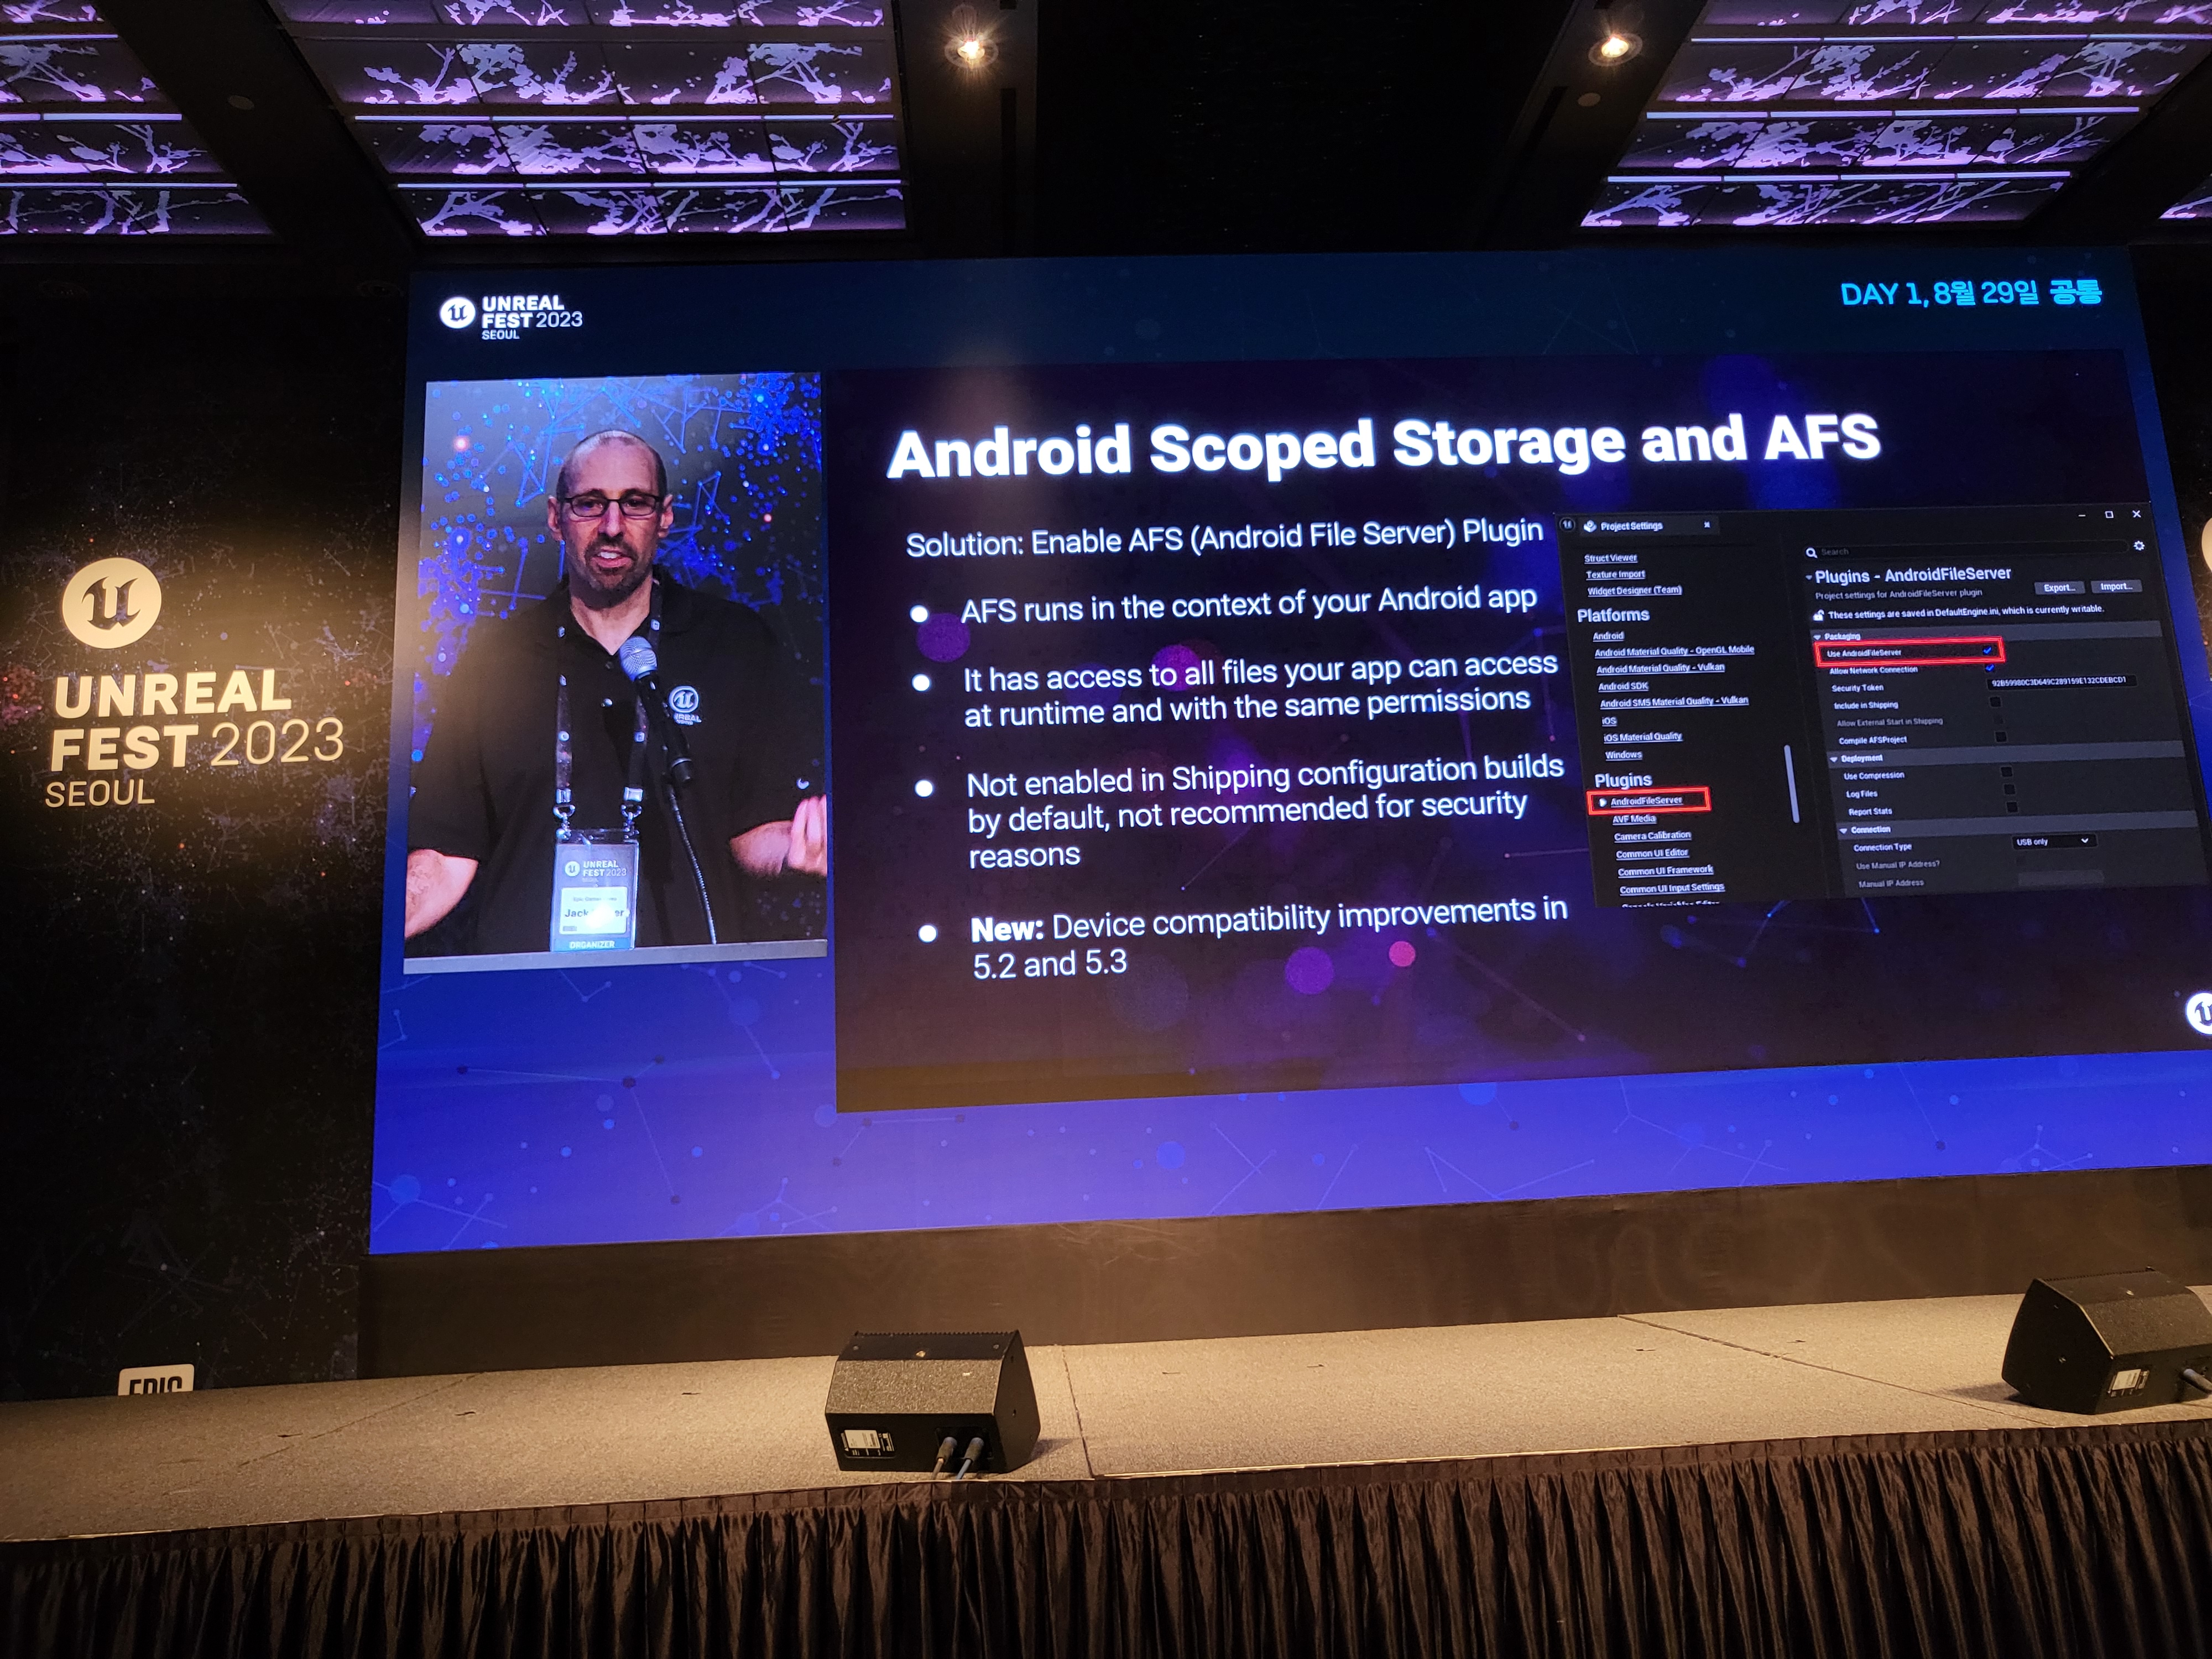 Android Scoped Storage And AFS 2